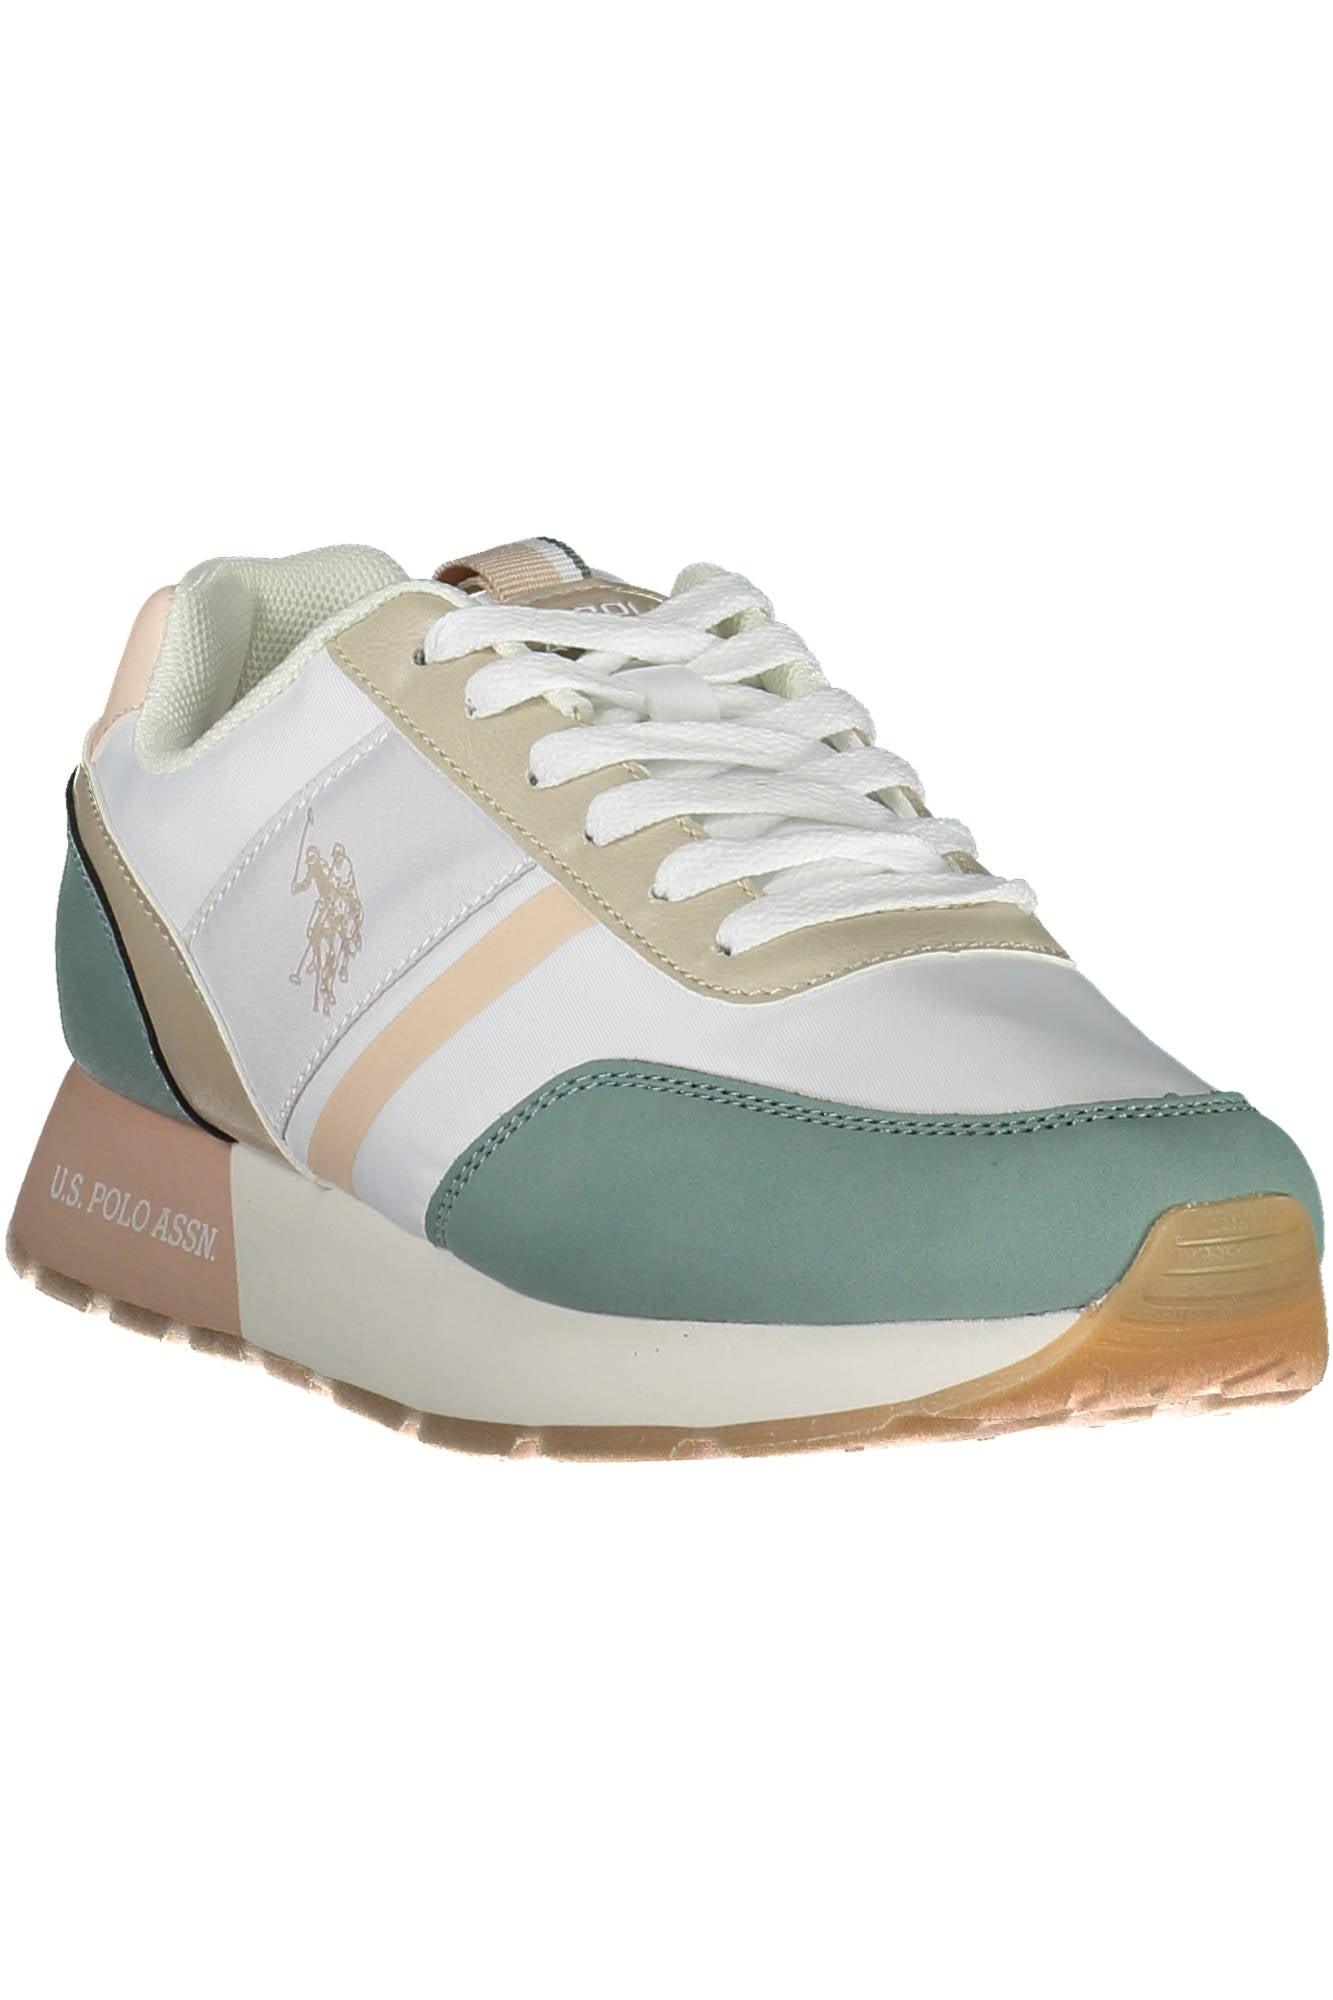 U.S. POLO ASSN. Sneakers in White | Lyst